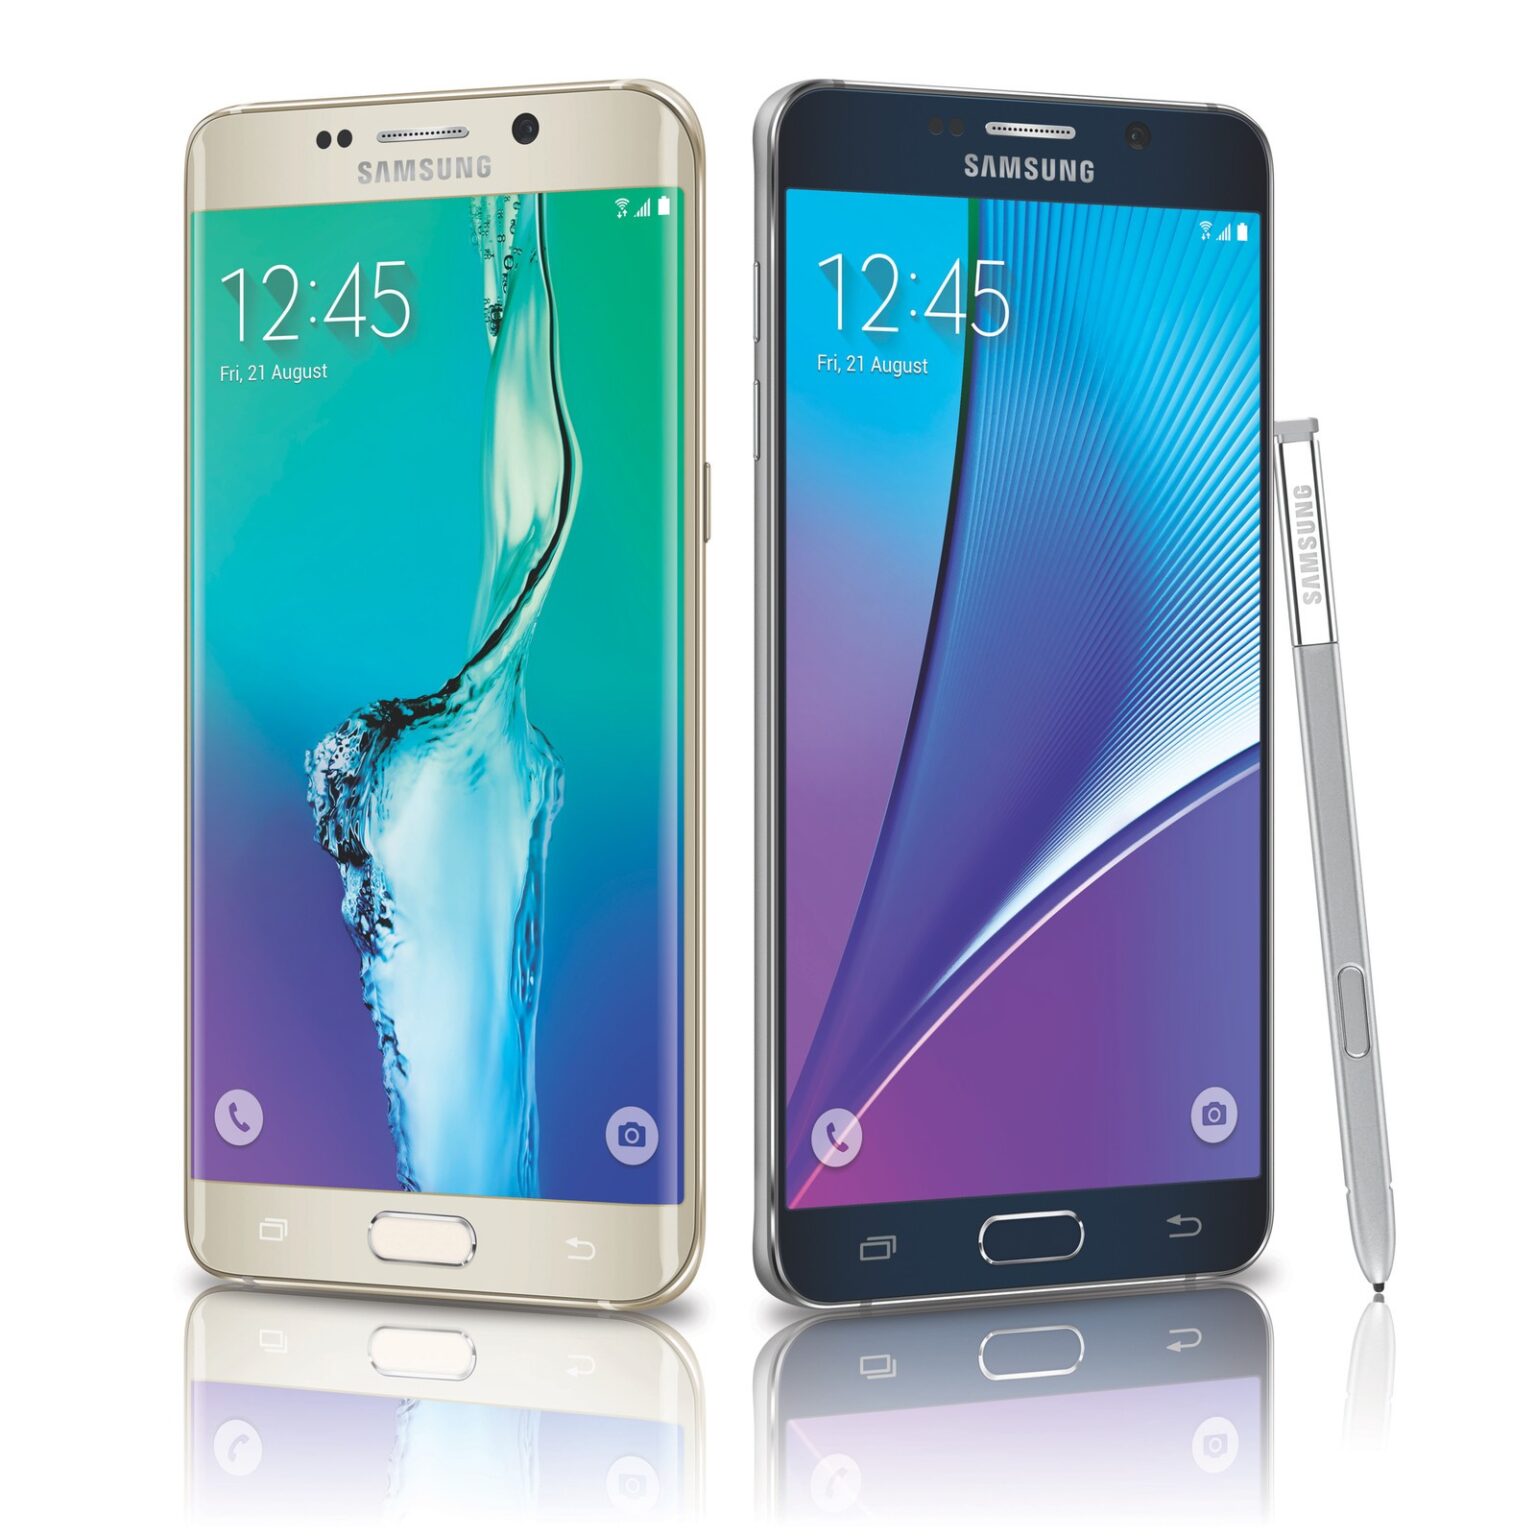 Note 5 Galaxy S6 Edge Plus Together Press Image.jpg